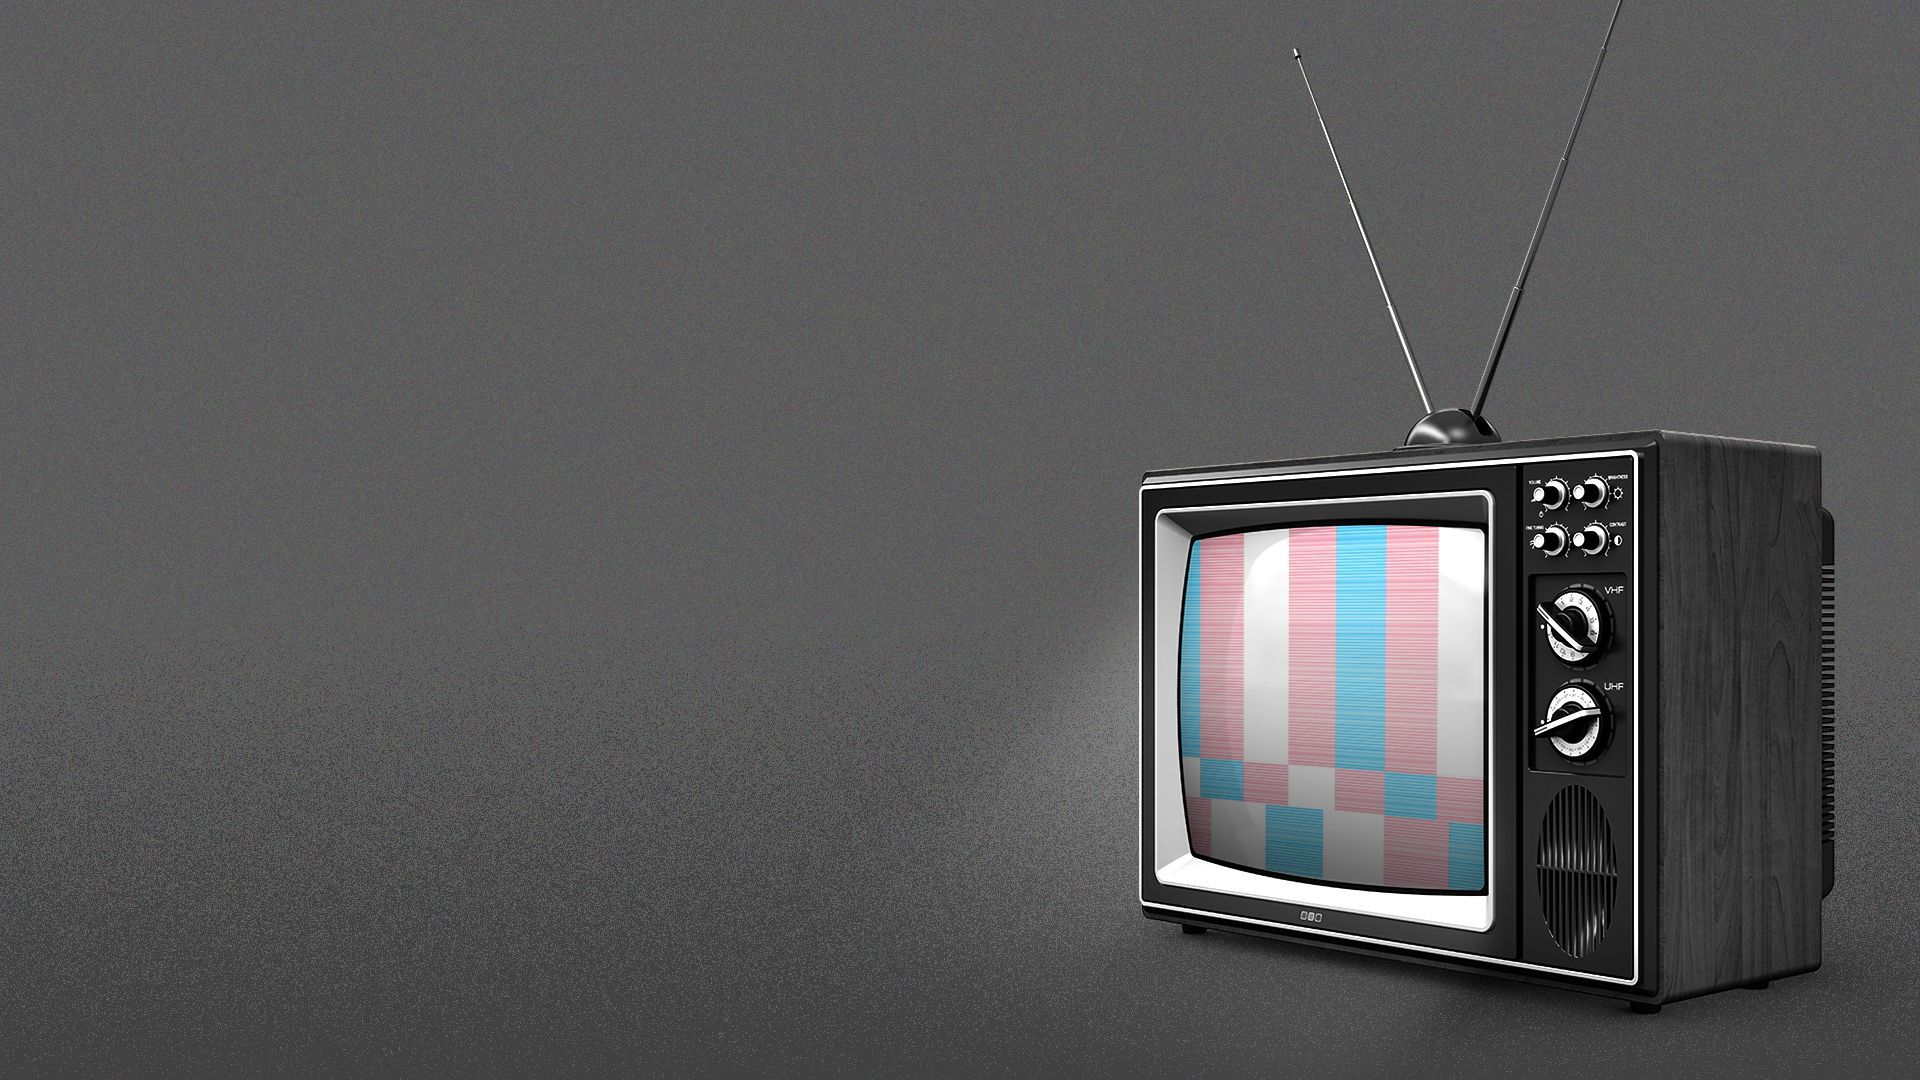 Illustration of an old TV with the trans flag as a TV test pattern.  